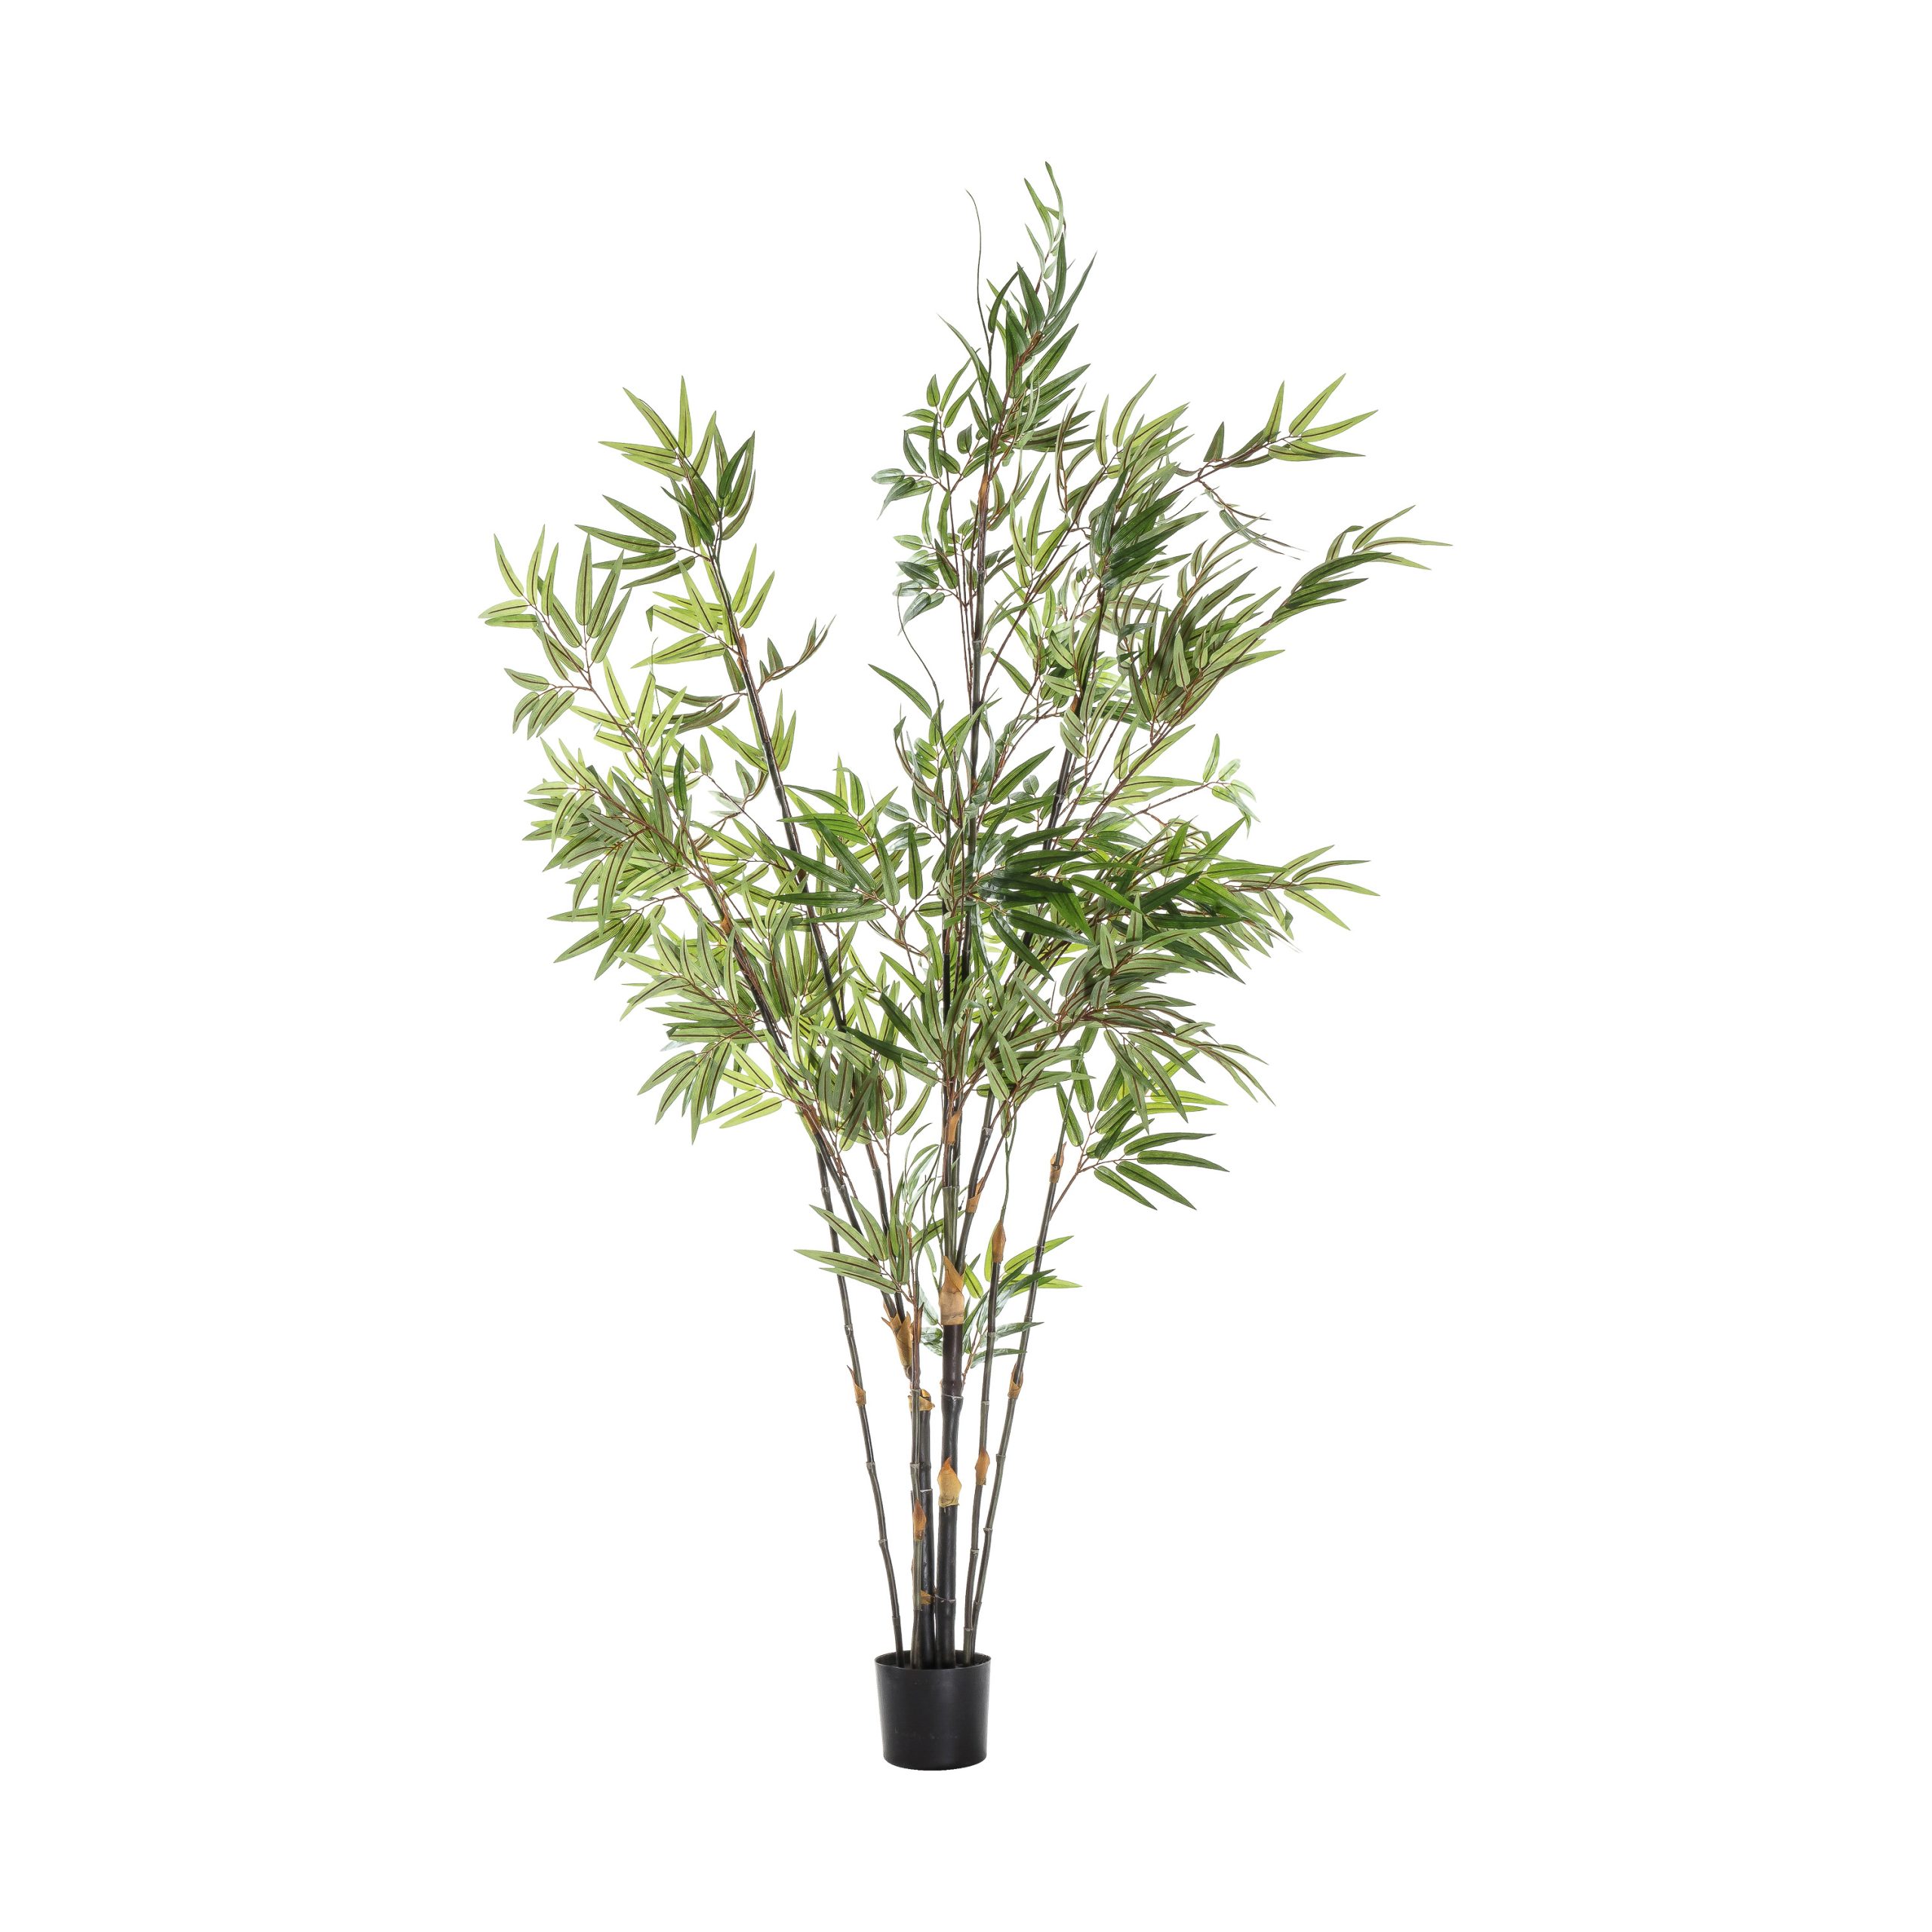 Gallery Direct Bamboo w/9 Leaves